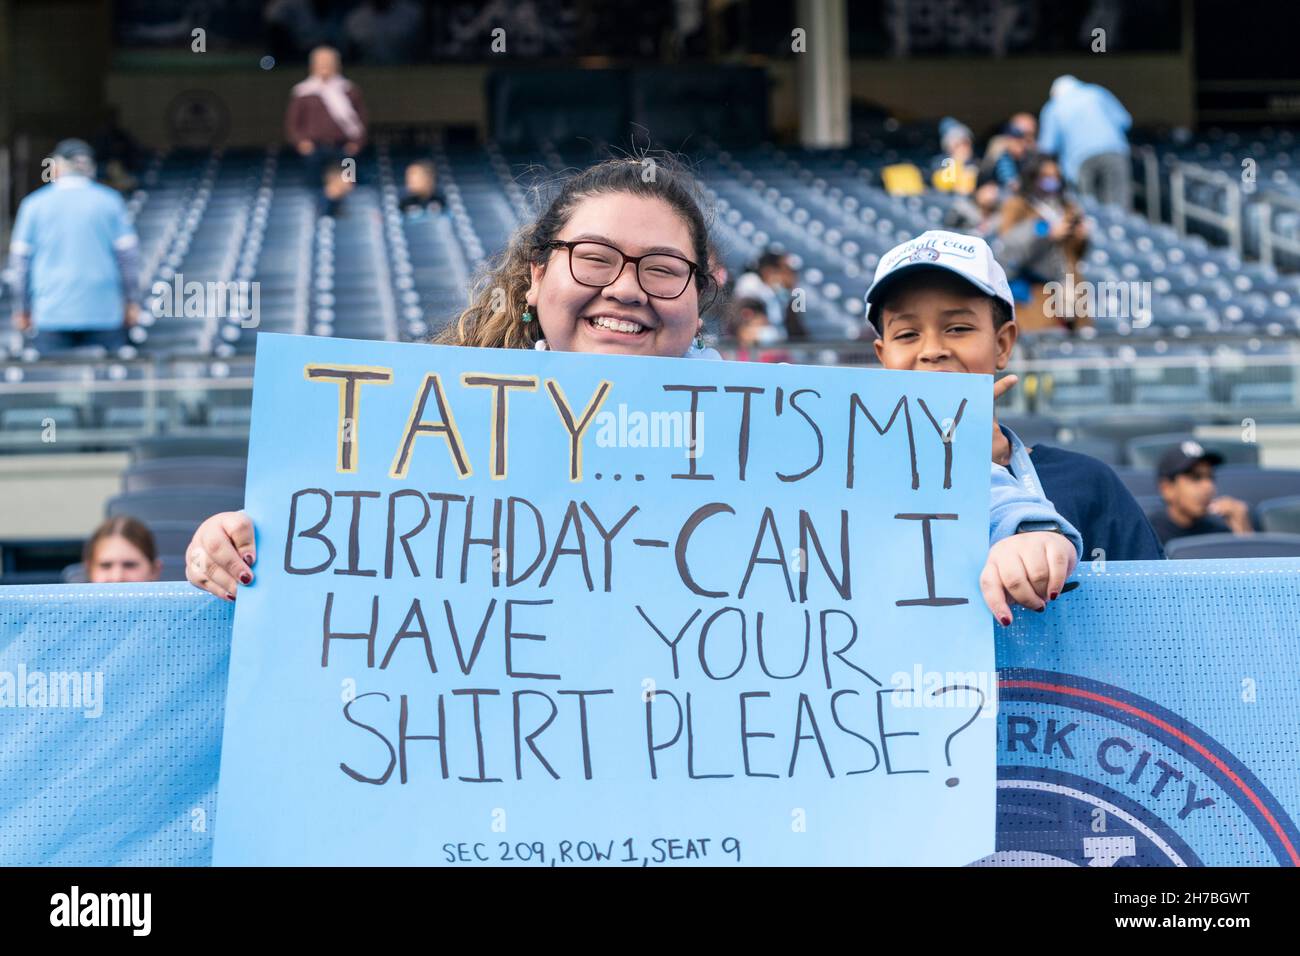 New York, NY - November 21, 2021: Carolyn Seminario from Queens is fan of NYCFC since 2017, came to Yankee stadium on her birthday to cheer the team and is displaying sign asking Valentin Castellanos for his jersey during first round game of MLS Cup versus Atlanta United on Yankee stadium Stock Photo